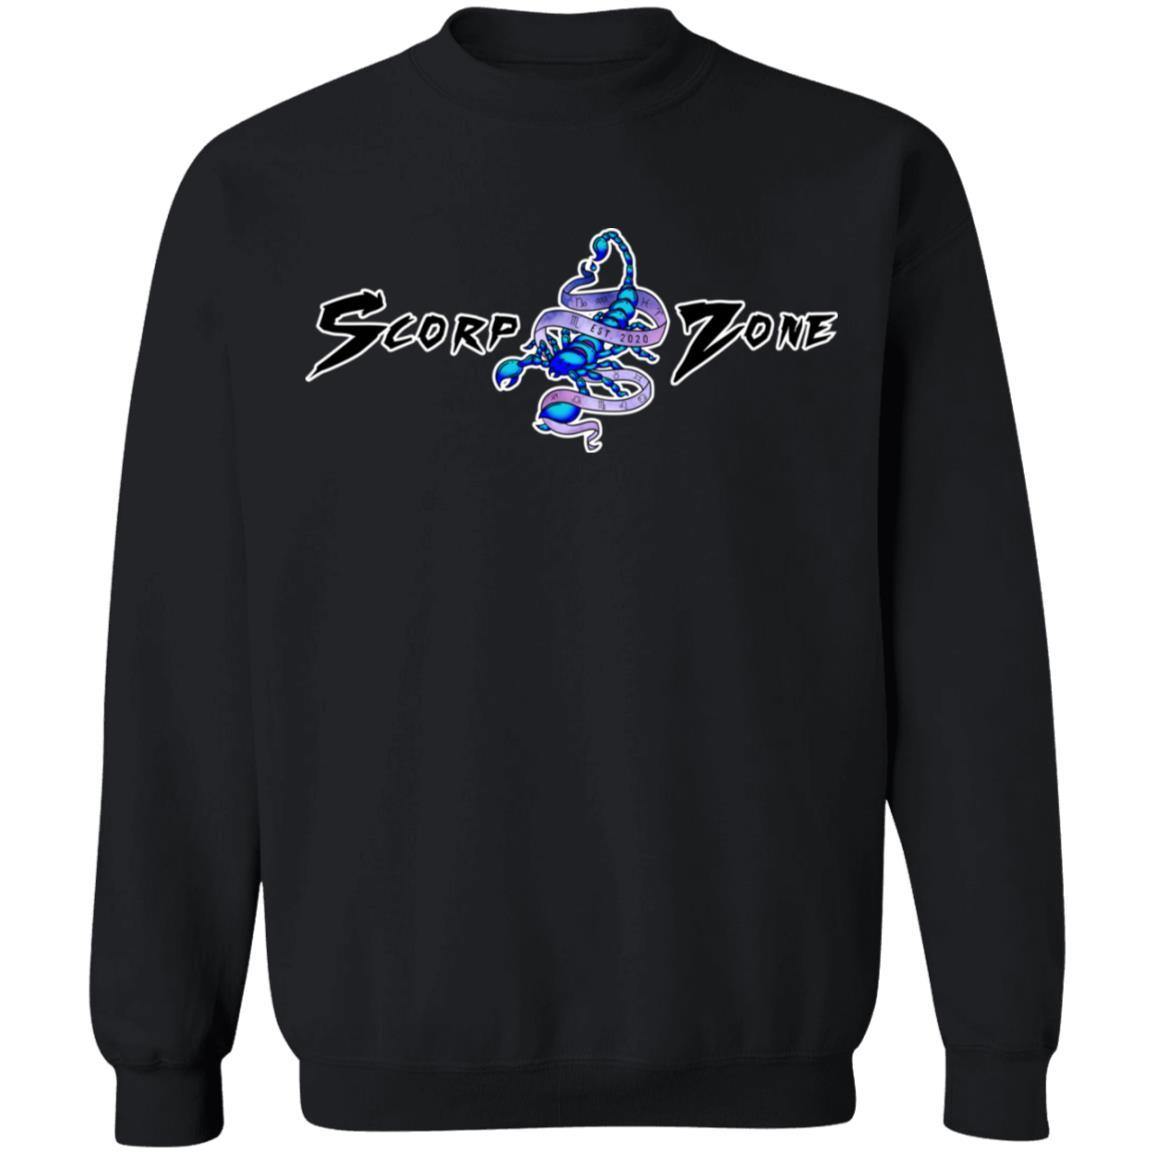 TAURUS DESIGN ON BACK AND SMALL SCORP ZONE LOGO ON FRONT -Z65 Crewneck Pullover Sweatshirt - ScorpZone